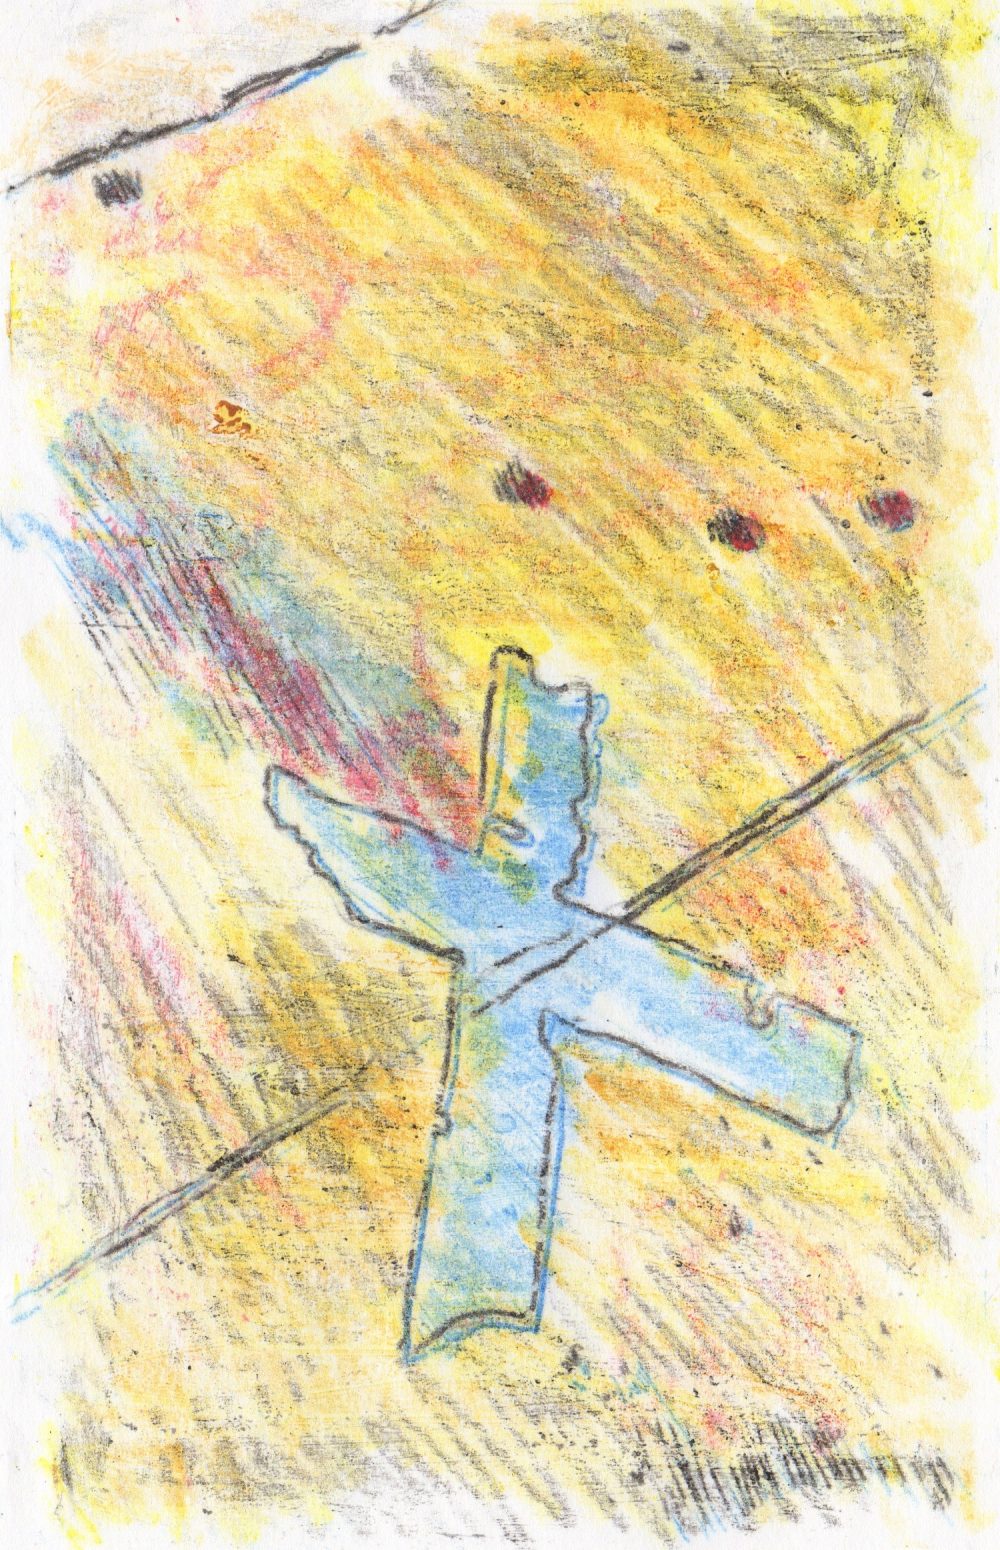 A drawing with expressive colorful marks depicting a blue x.